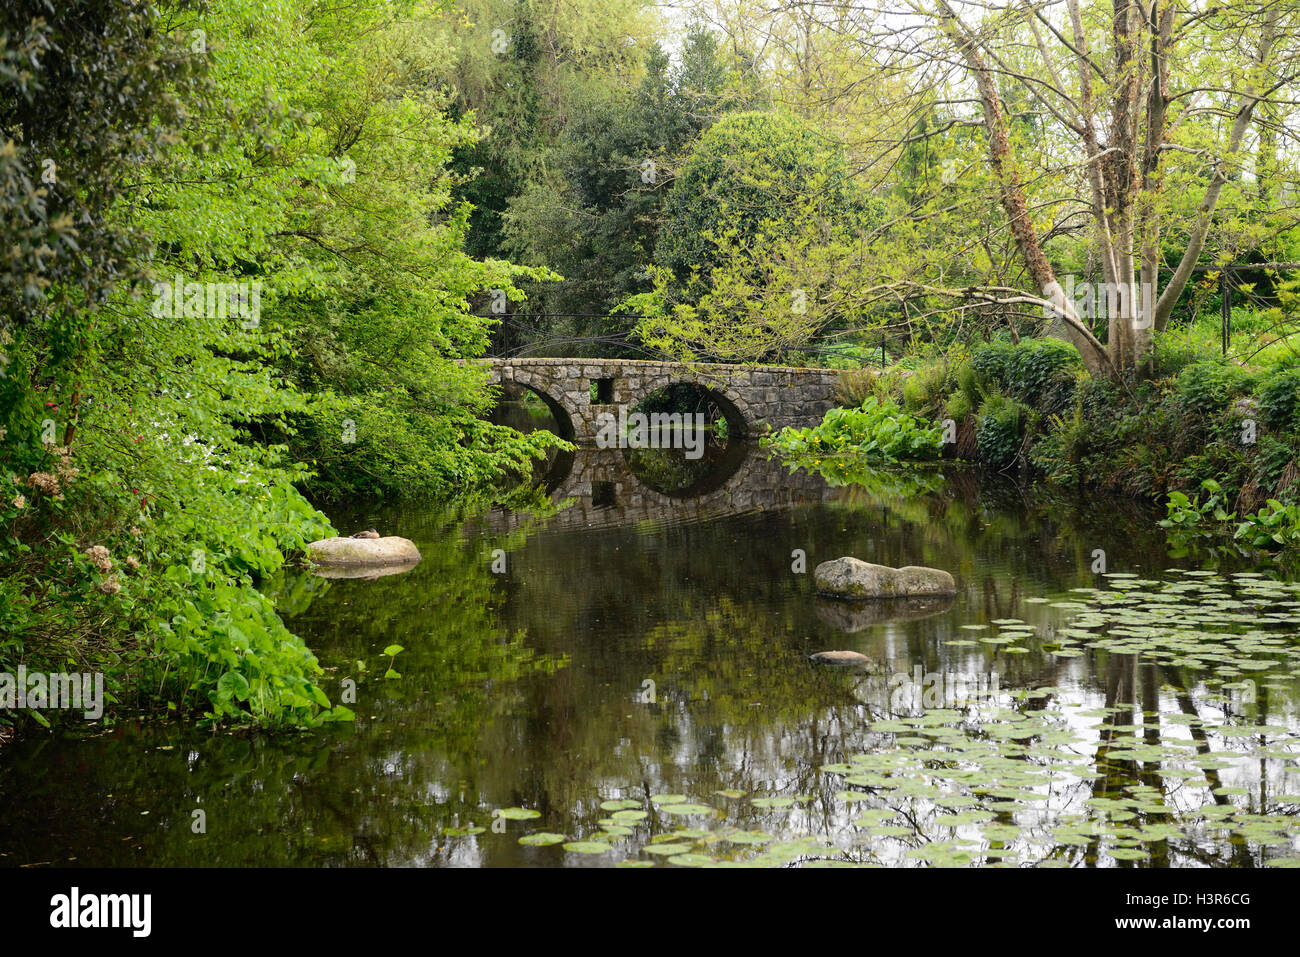 Stone arch bridge perfect reflection frame framed tree branch conifer lake pond altamont gardens carlow RM Floral Stock Photo